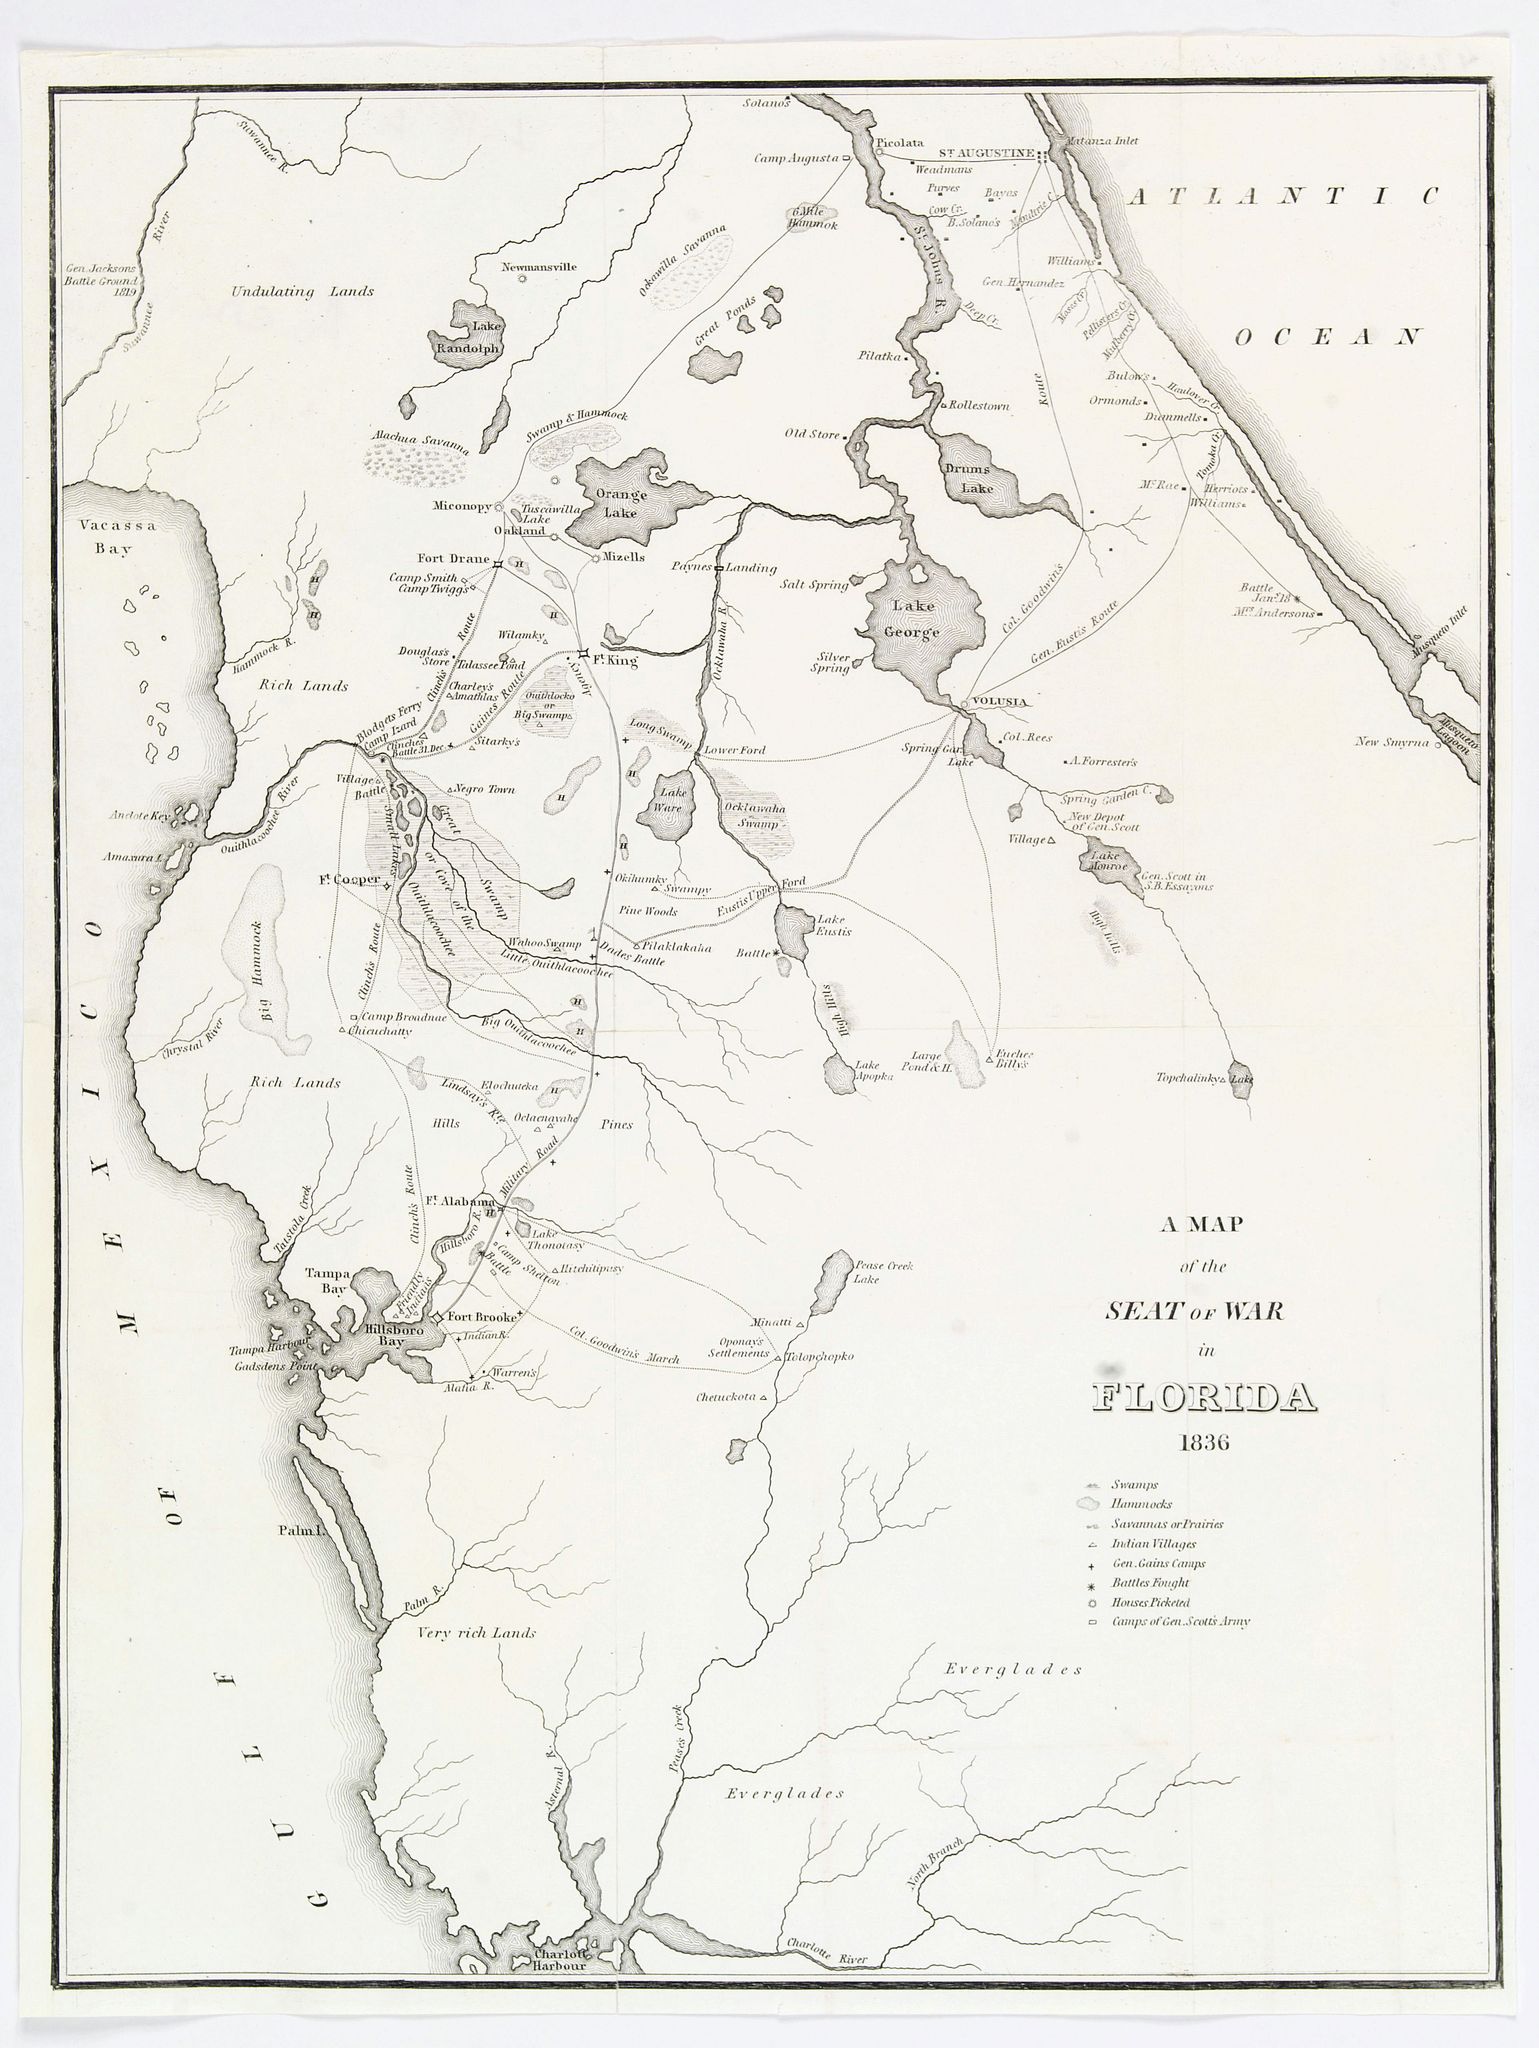 A Map of the Seat of War in Florida 1836